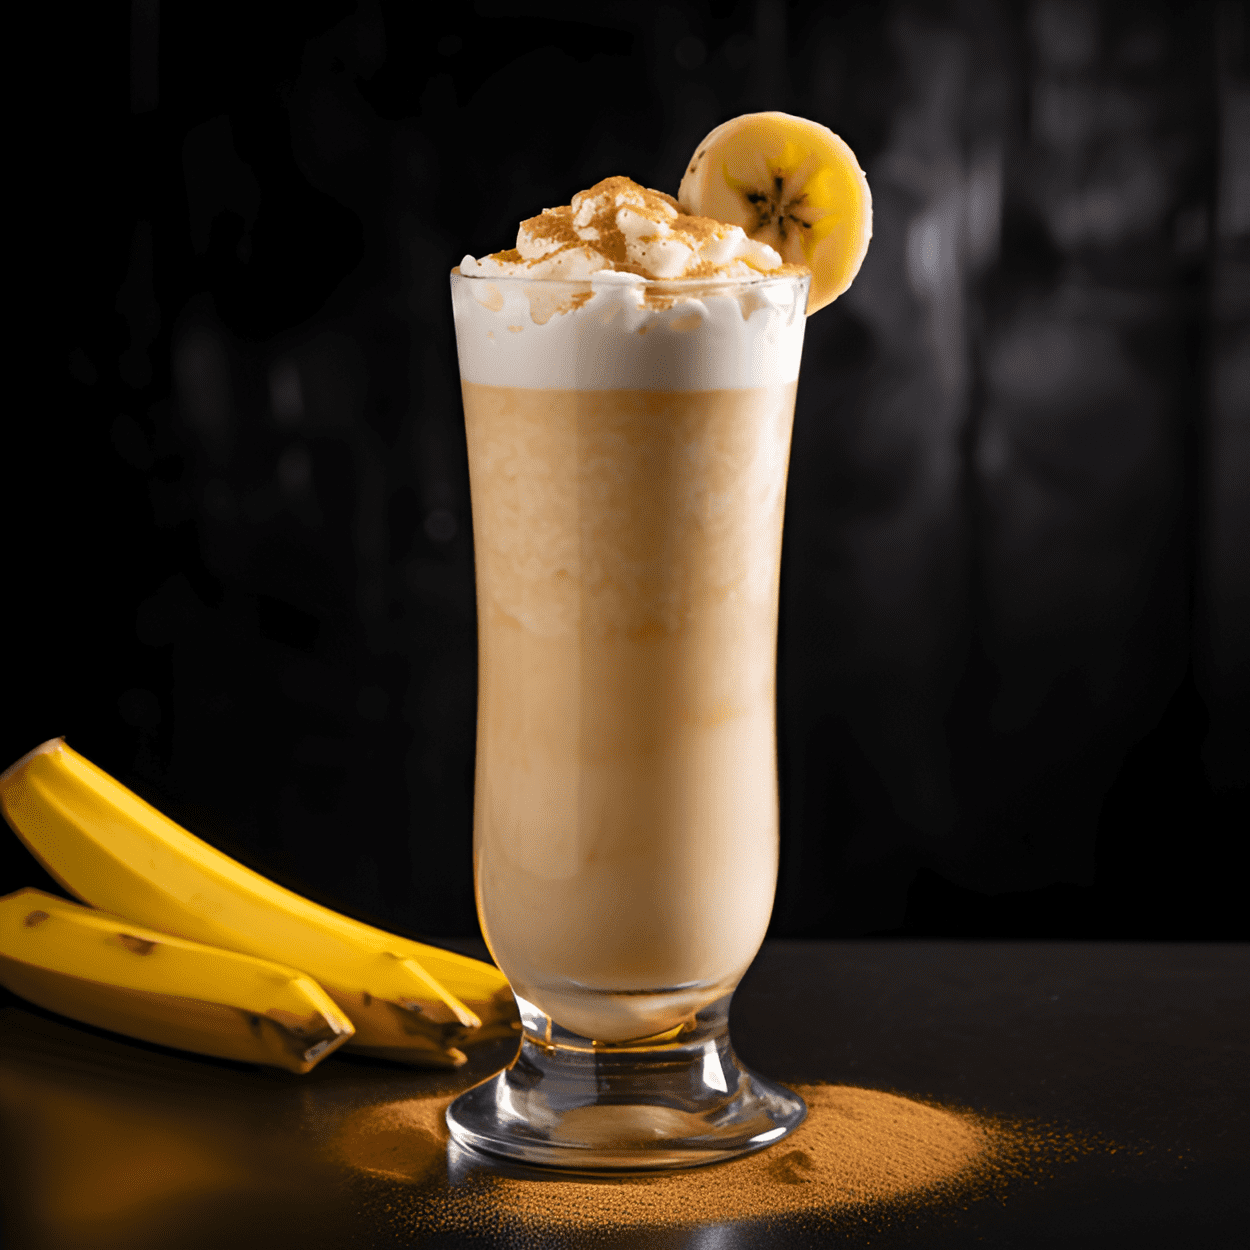 Jamaican Dirty Banana Cocktail Recipe - The Jamaican Dirty Banana is a sweet, creamy cocktail with a rich, velvety texture. The rum gives it a slight kick, while the banana and coffee flavors blend perfectly to create a tropical, indulgent drink.